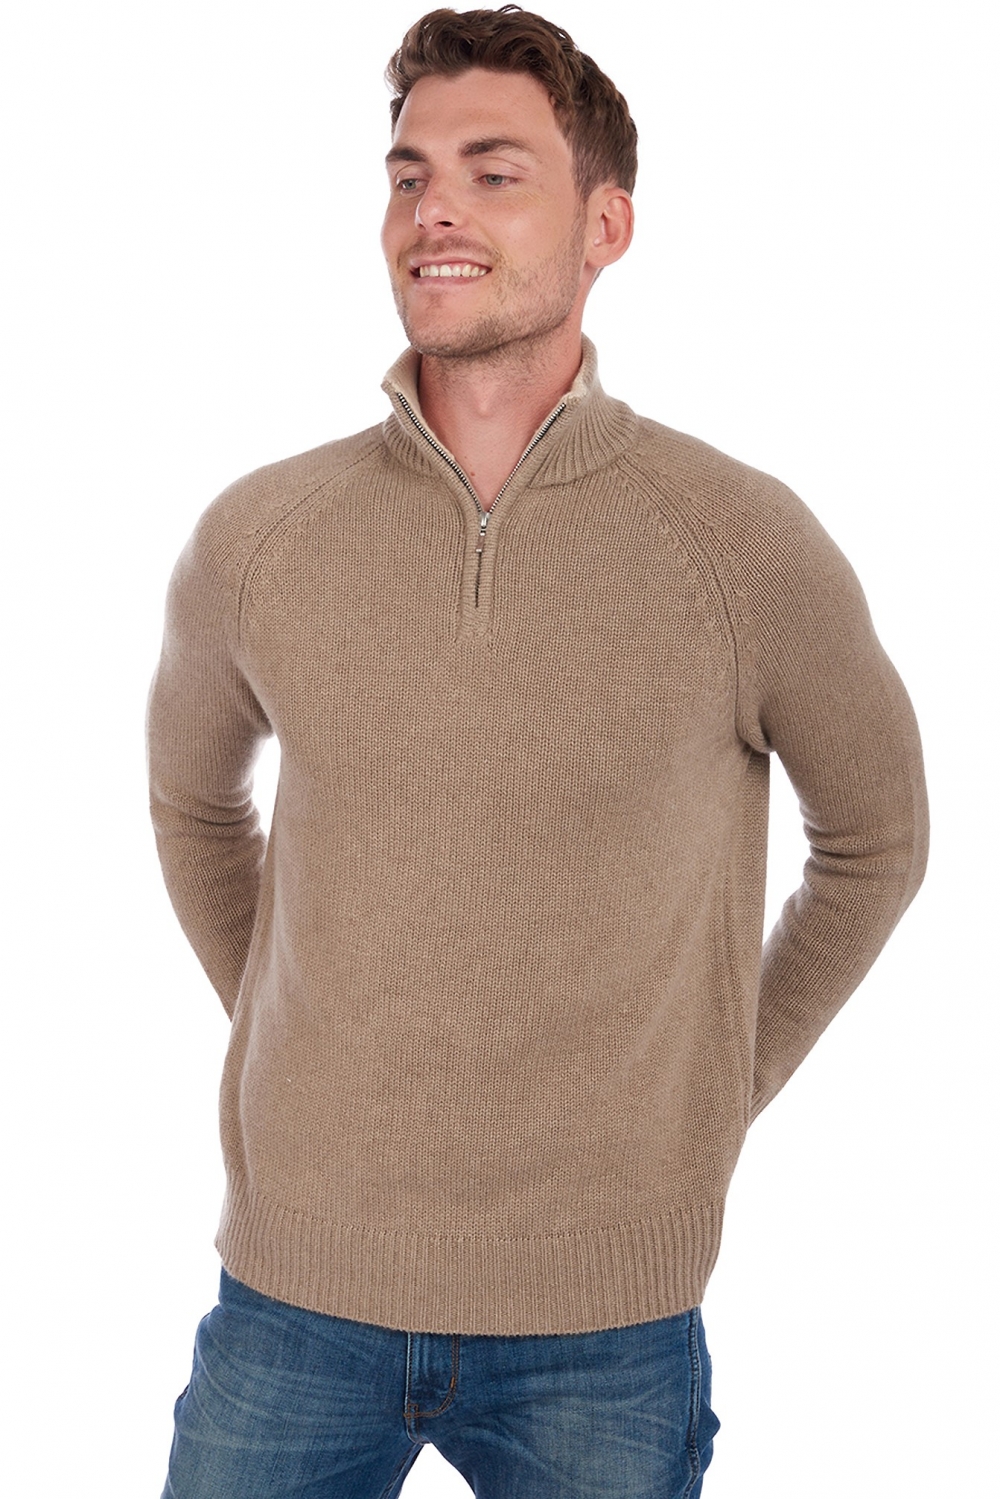 Cachemire pull homme angers natural brown natural beige 2xl